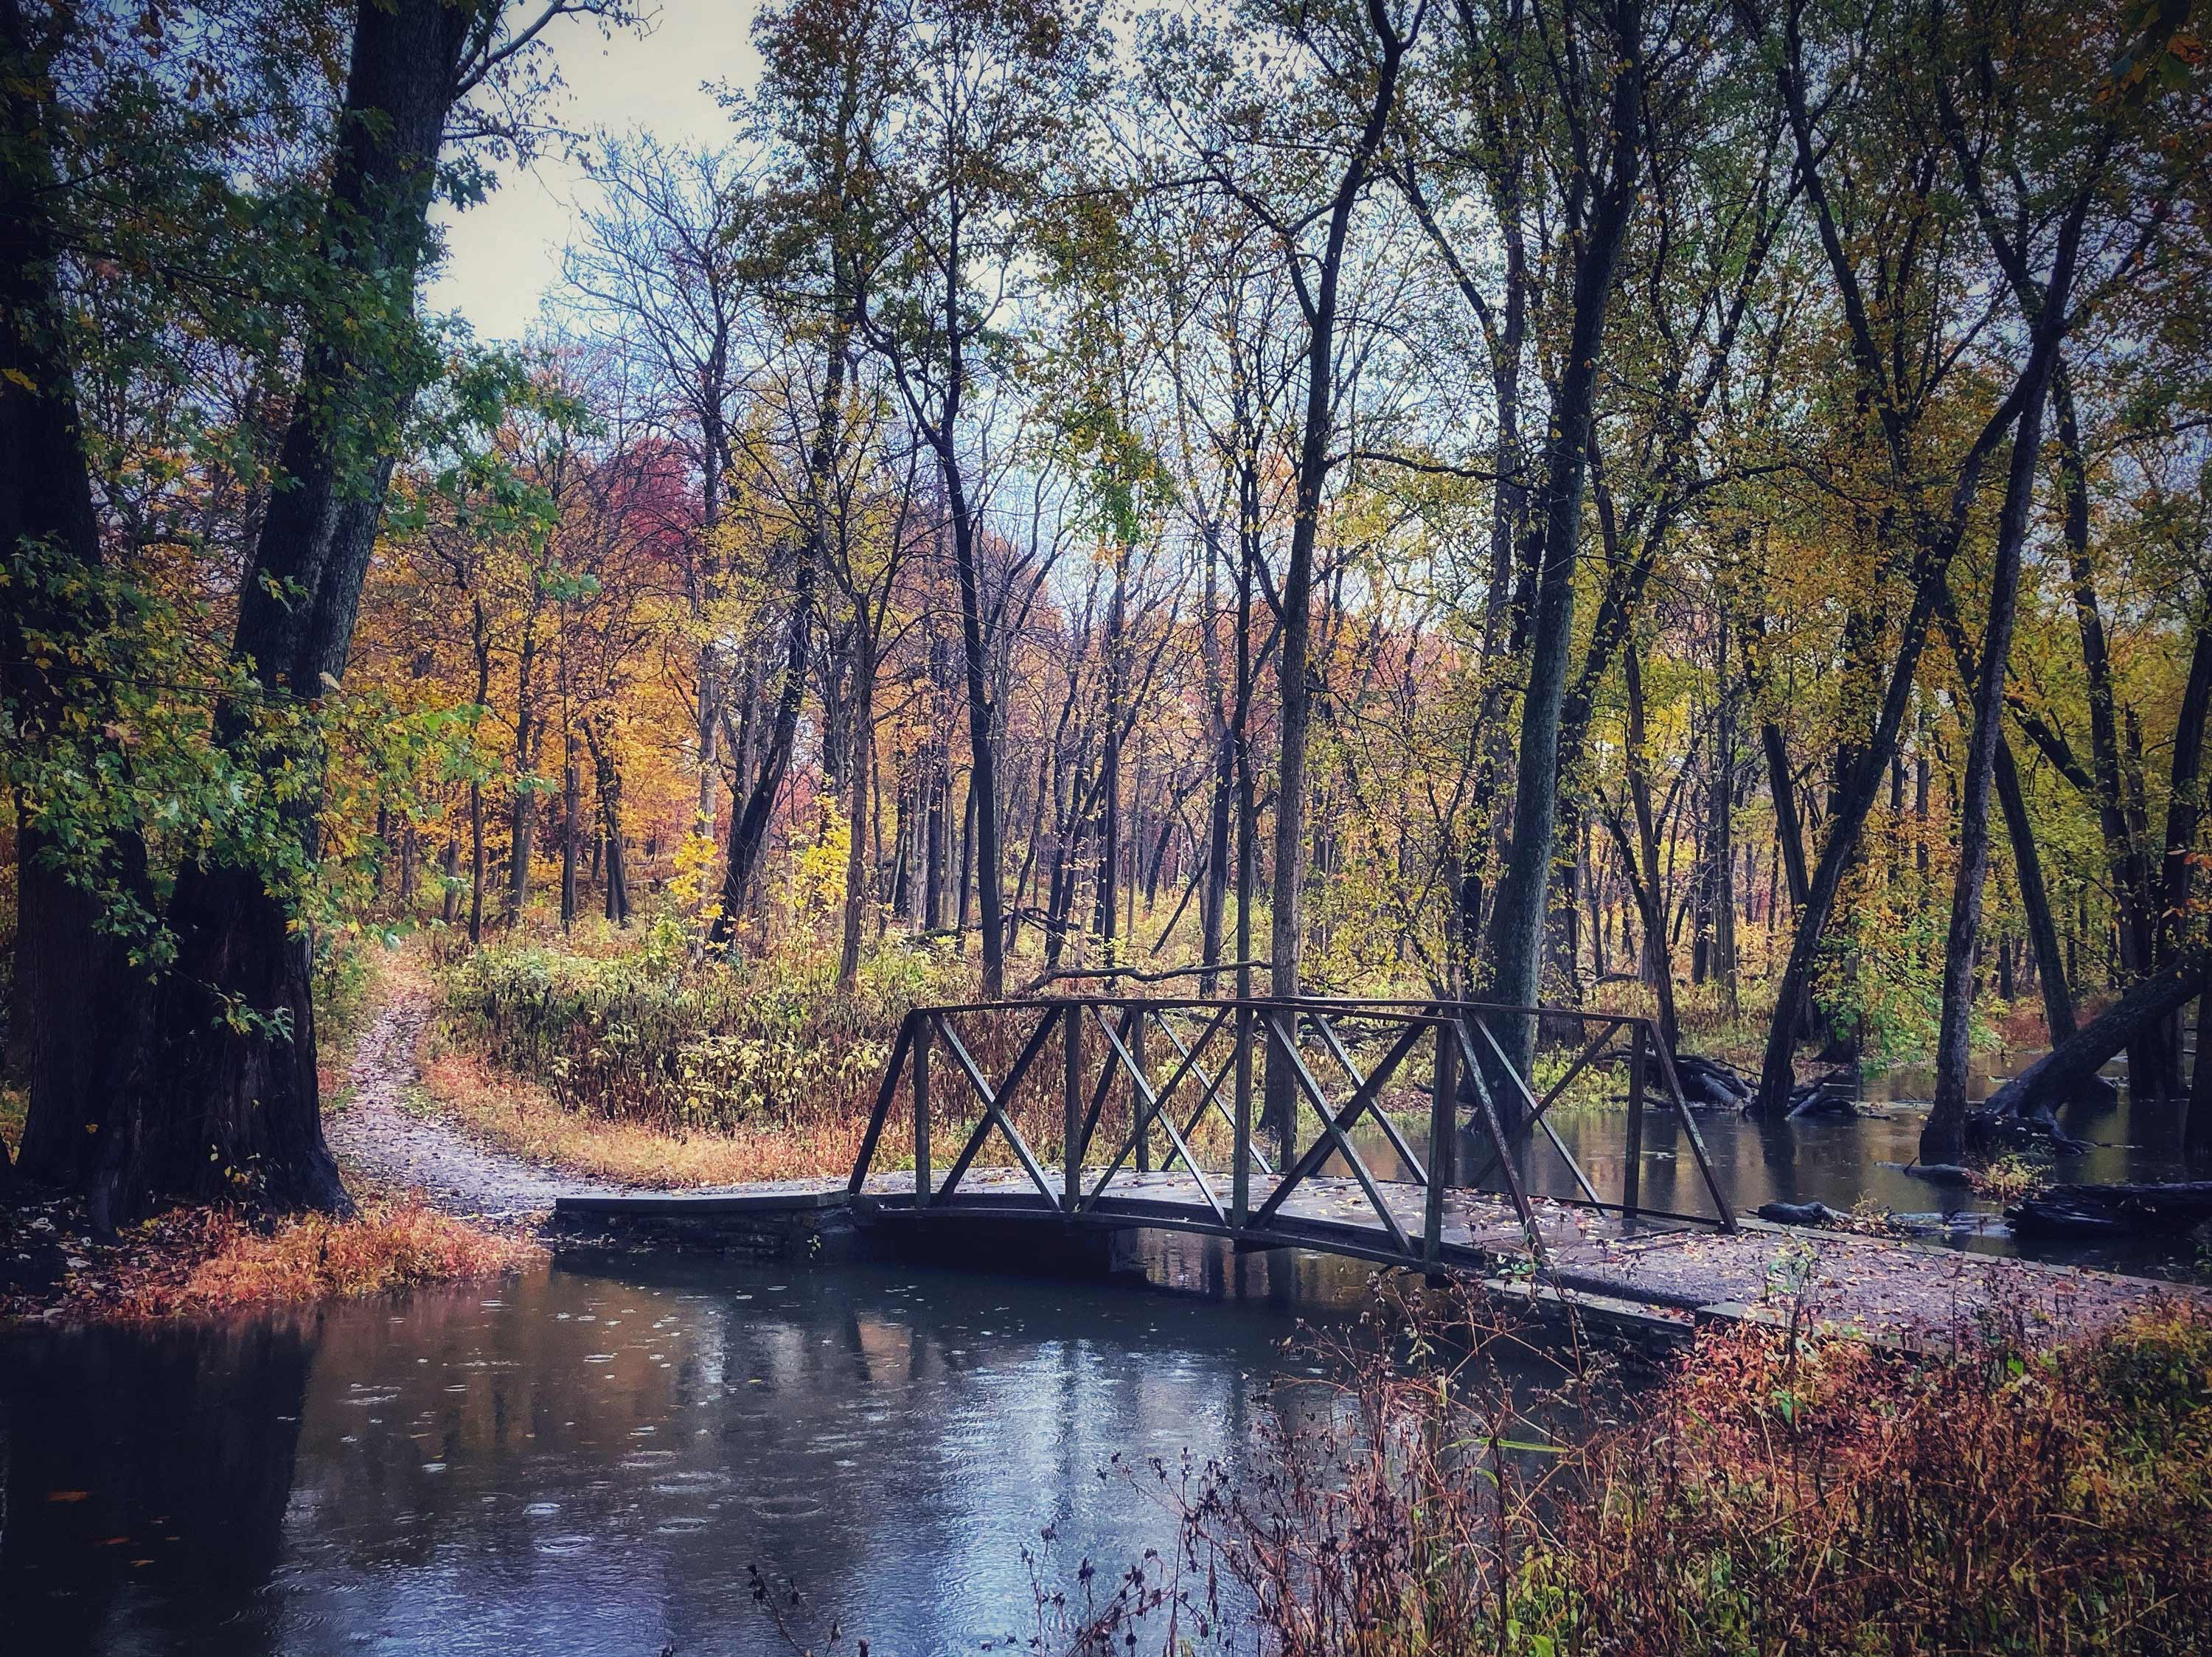 A view of the bridge at Messenger Woods during fall.